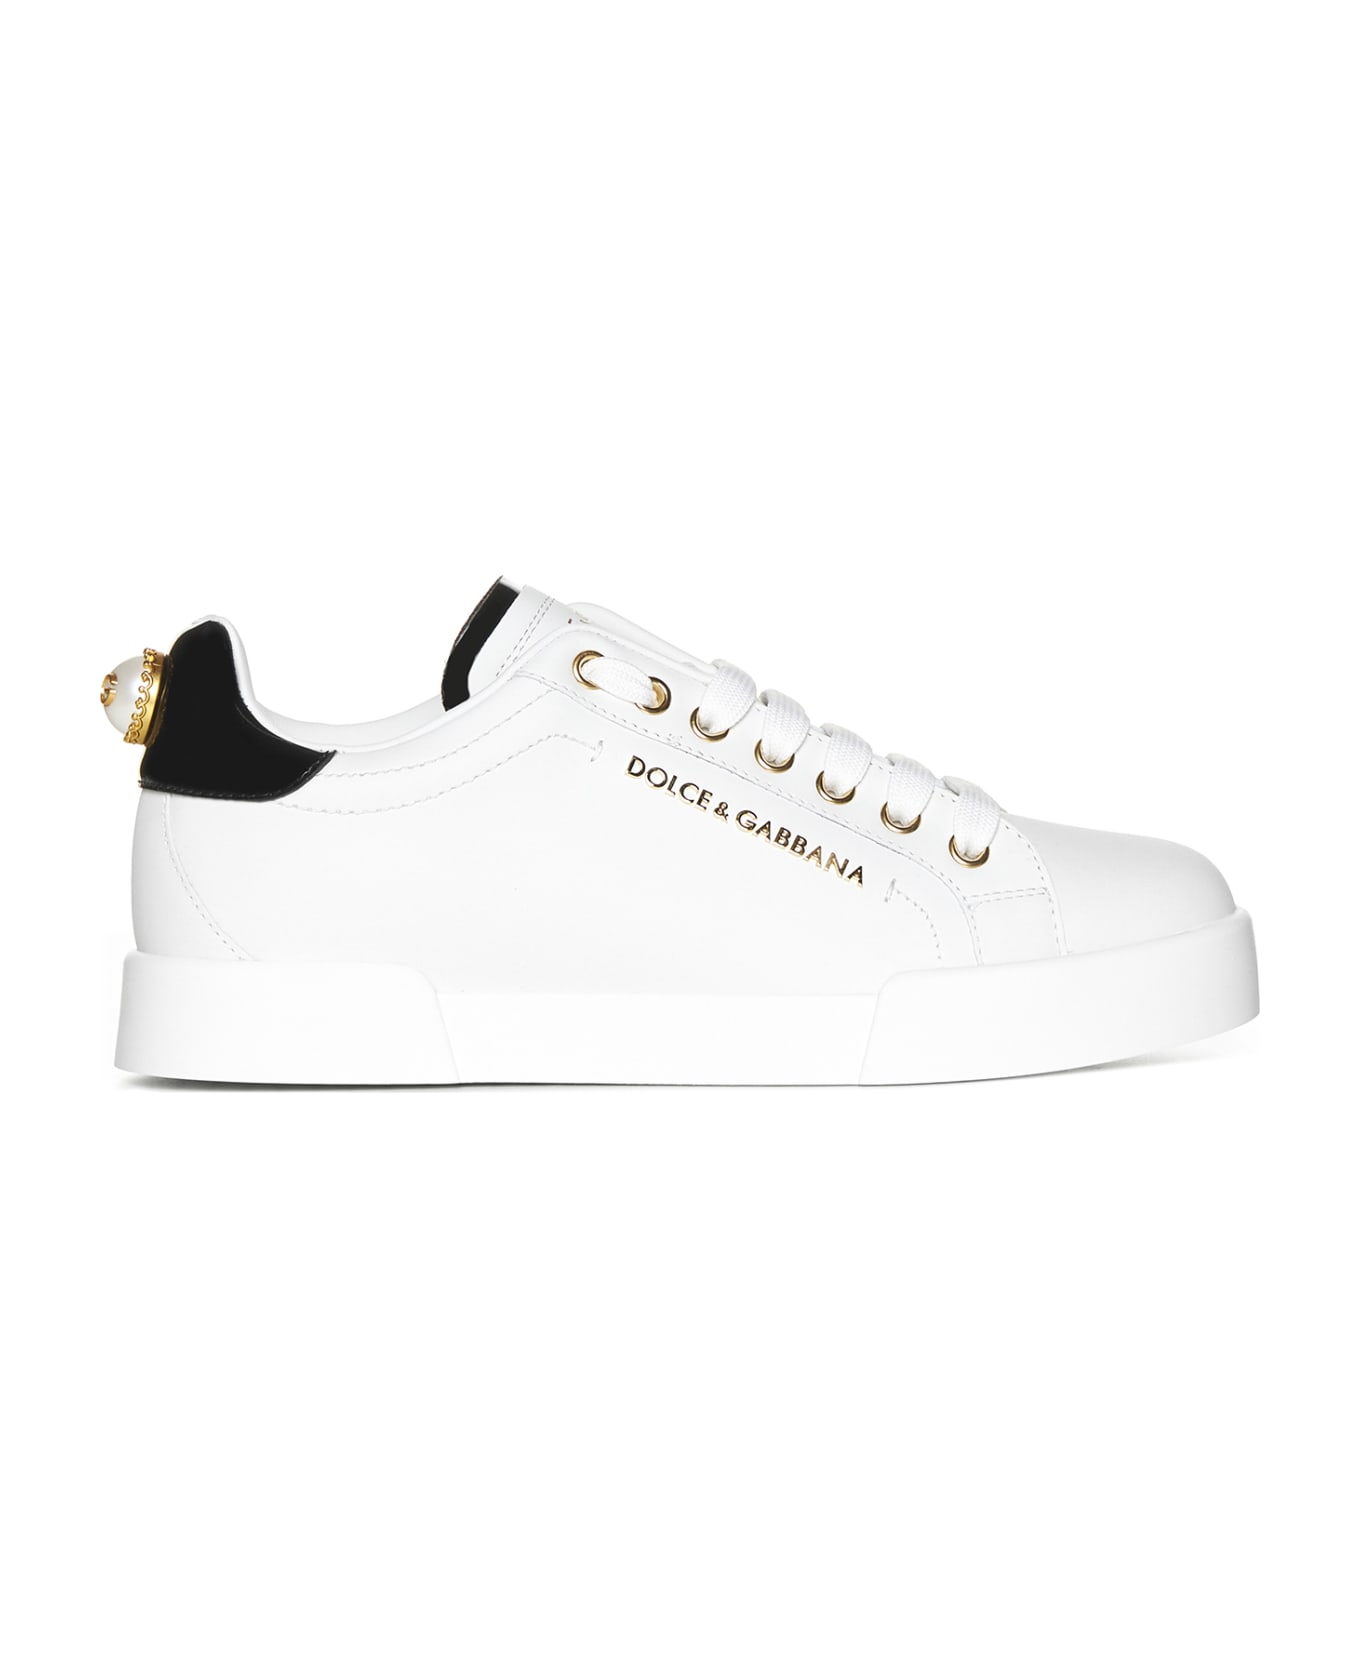 Dolce & Gabbana Embellished Sneakers - White